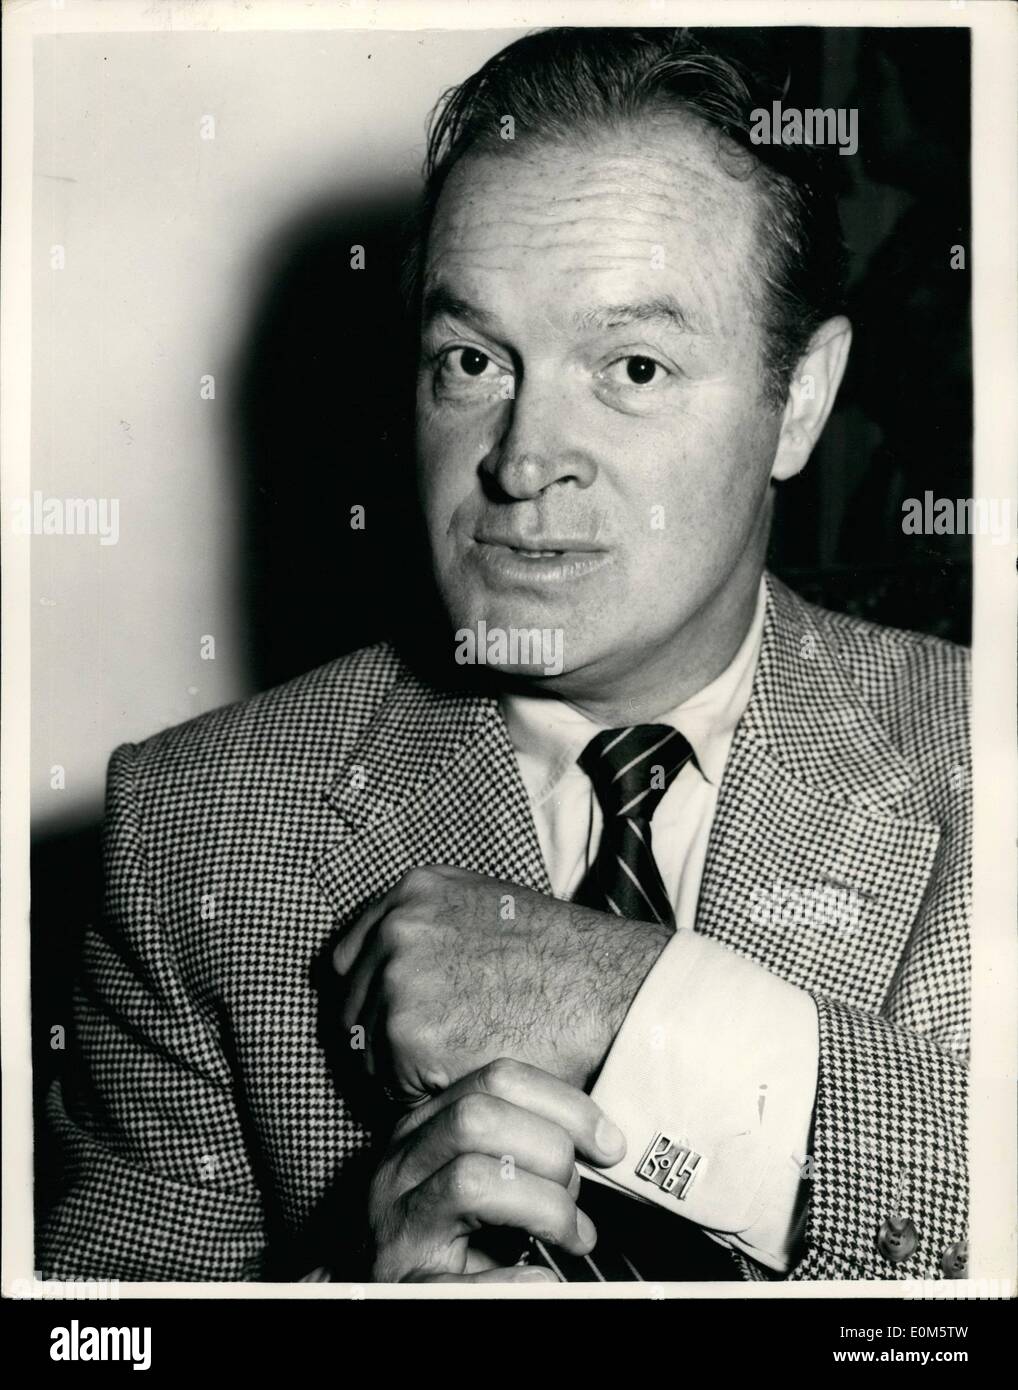 Sep. 08, 1953 - 8-9-53 Bob Hope and Gloria de Haven in London. Showing off his cuff-links. A reception was held Savoy Hotel this afternoon for American stars Bob Hope and Gloria de Haven who are to appear at the London Palladium. Keystone Photo Shows: Bob Hope points out his Bob Hope Cuff-links, during the reception at the Savoy this afternoon. Stock Photo